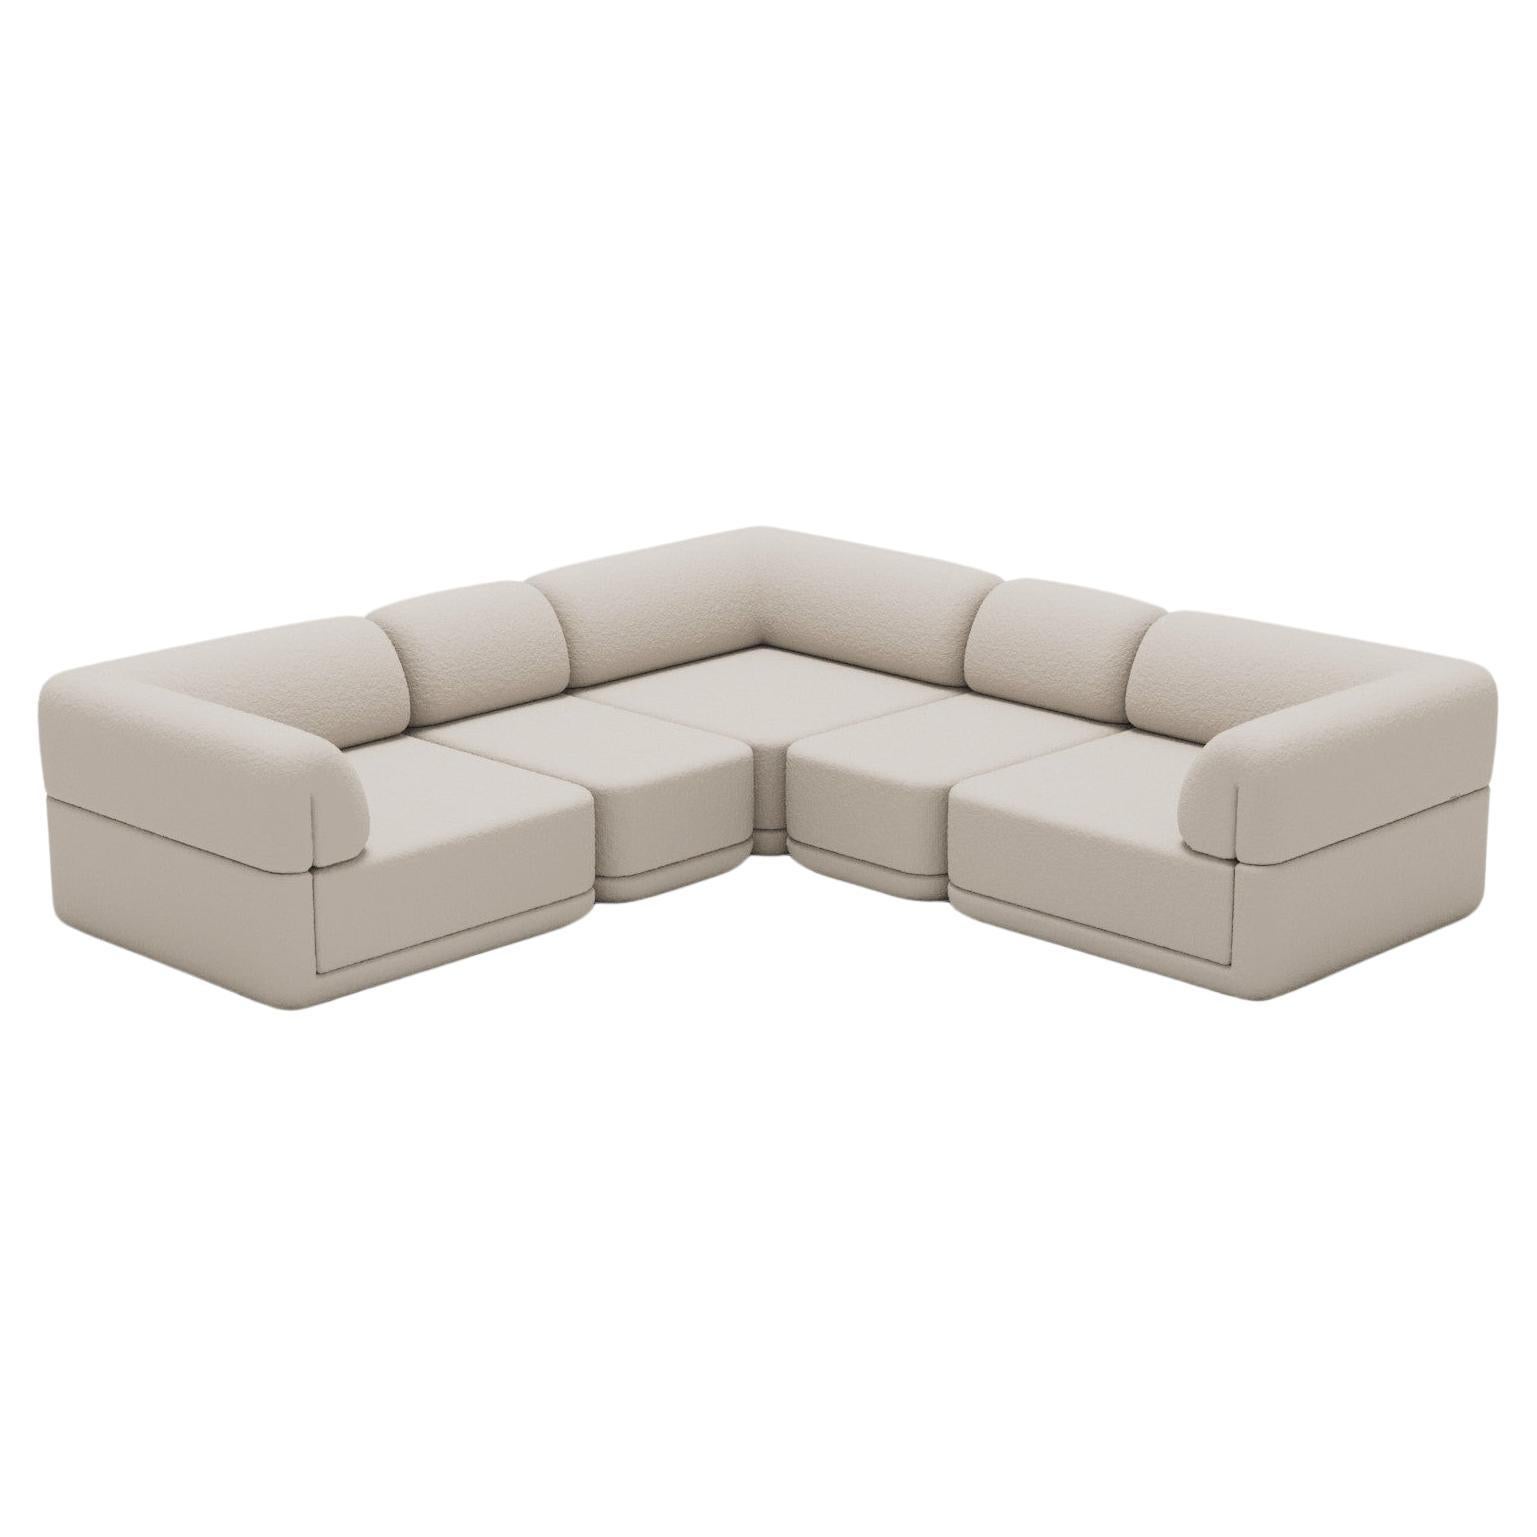 The Cube Sofa - Corners & Slims For Sale